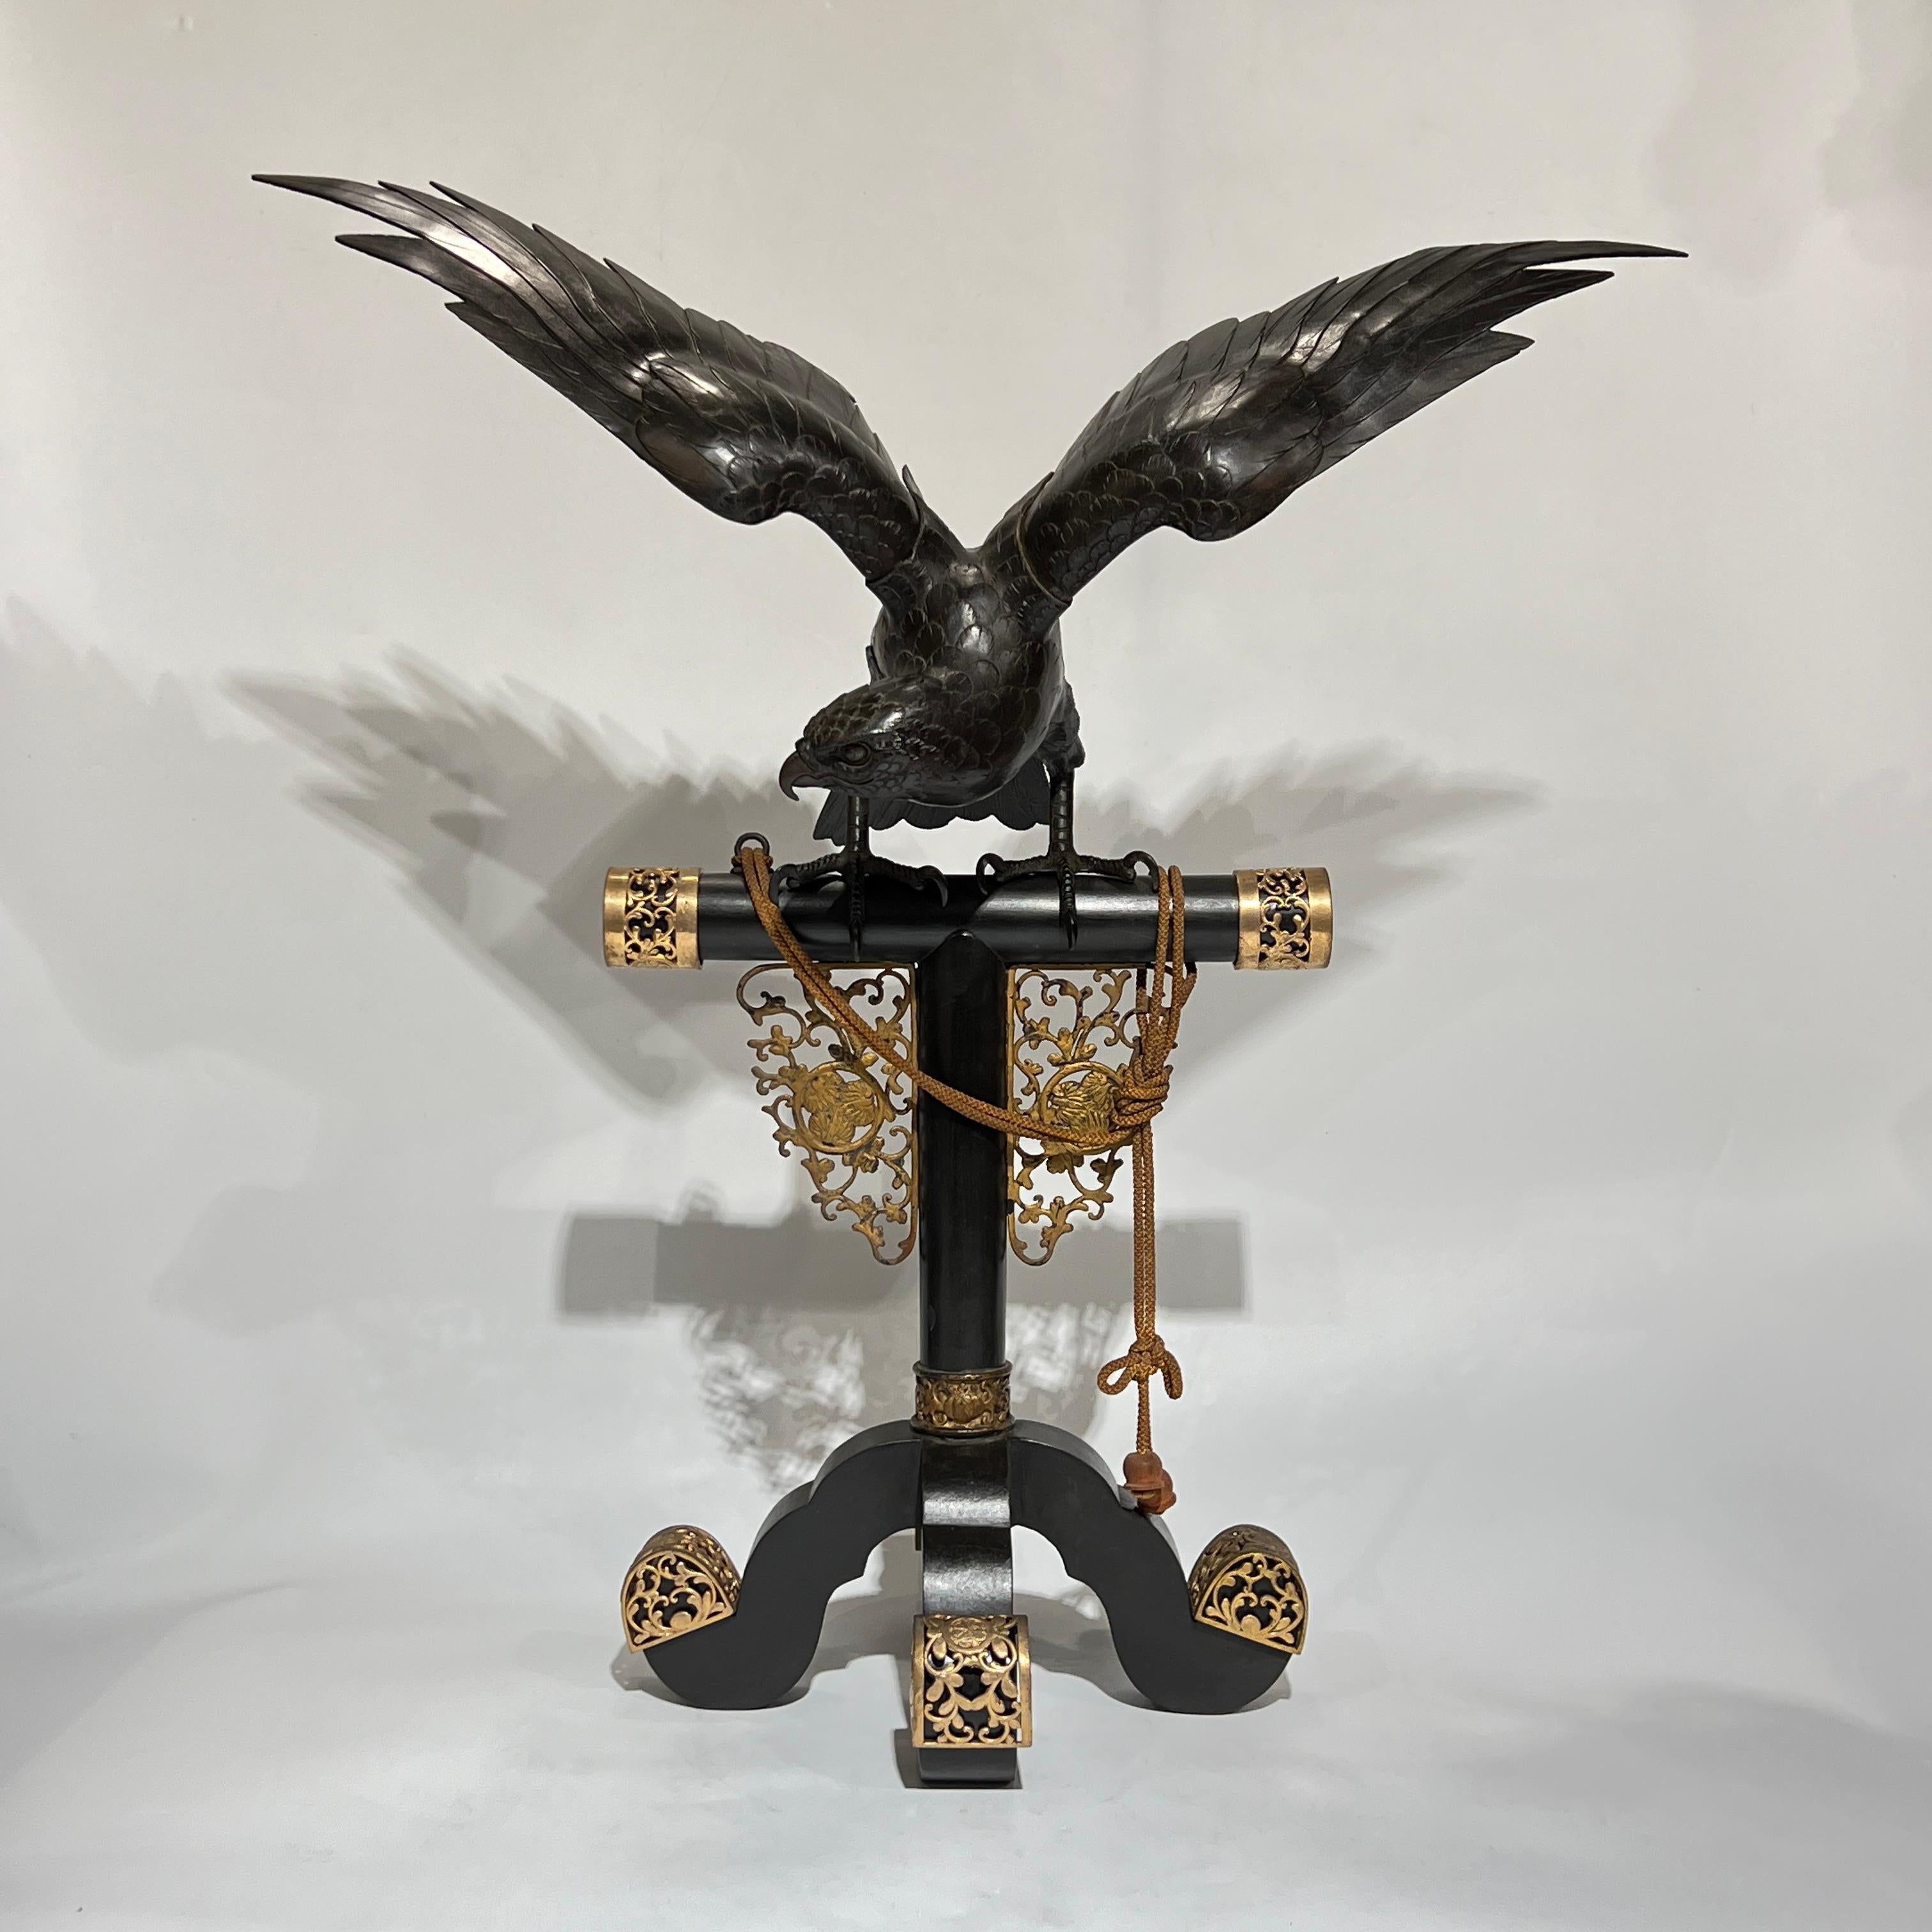 very fine quality 19 century Meiji period  Japanese Bronze Hawk Sculpture on PedestalFinely sculpted and cast, patinated bronze figure of a hawk or other bird of prey, perched on a bronze  stand with bronze mounts and cord with tassel.